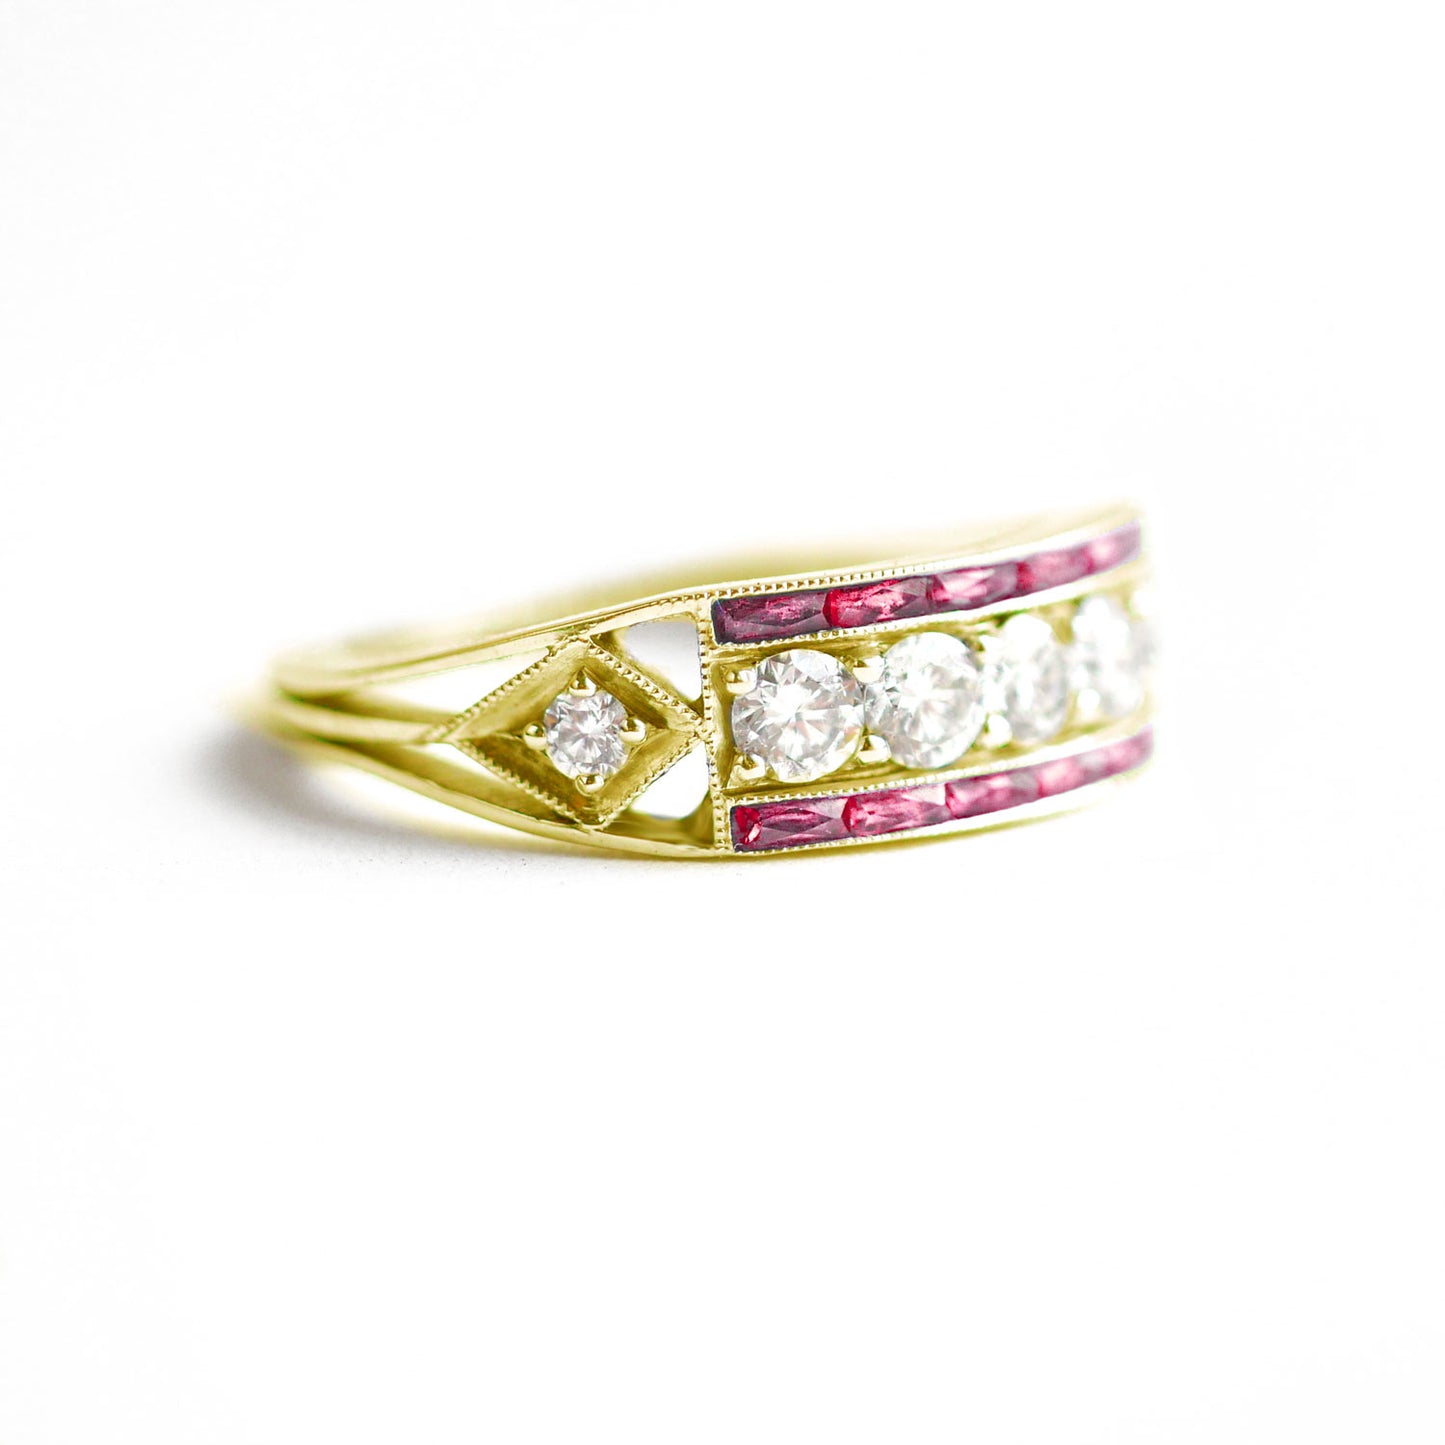 Art Deco Five Diamond Ring with French Cut Rubies